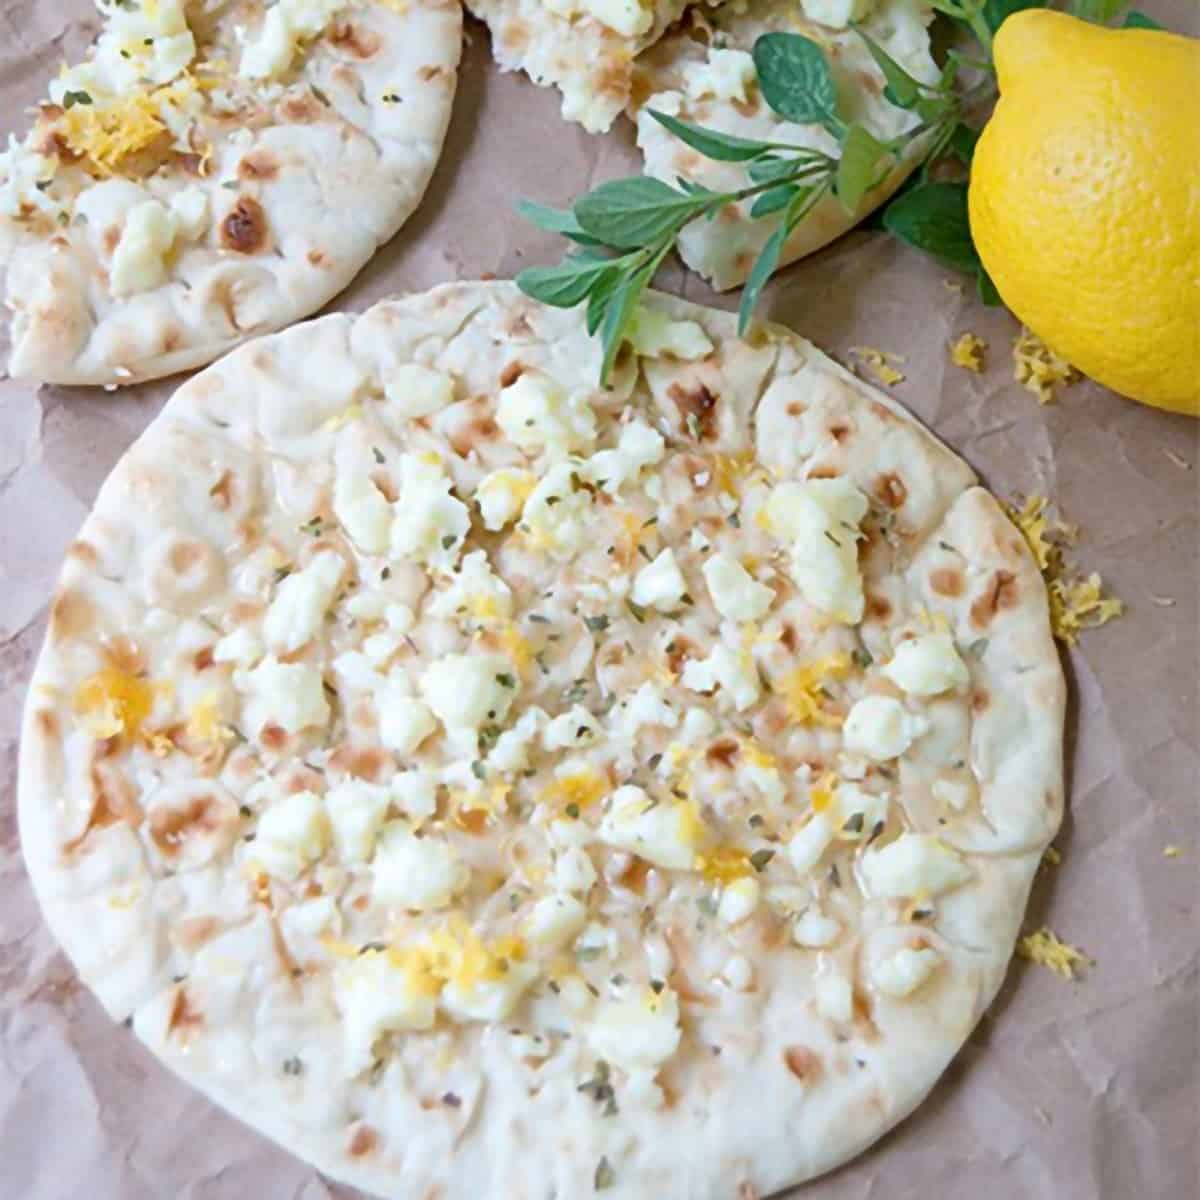 Flatbread topped with cheese, lemon zest, and oregano.